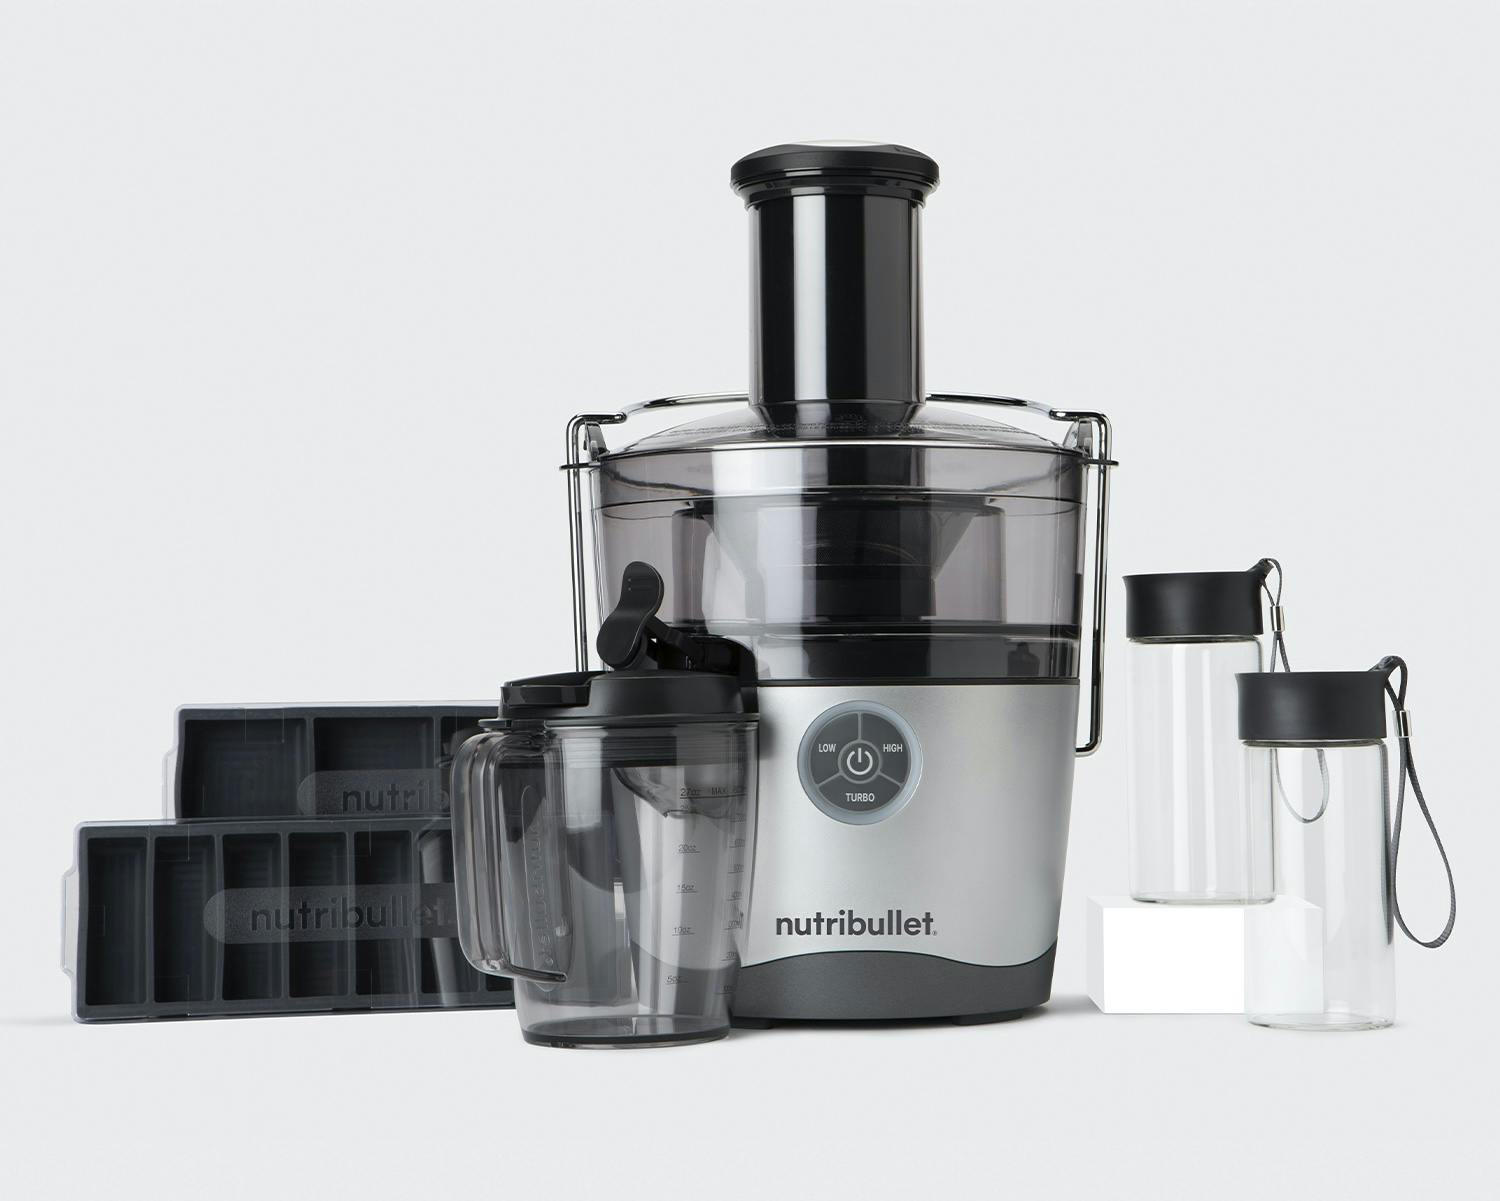 User manual NutriBullet Pro 1200 (English - 16 pages)